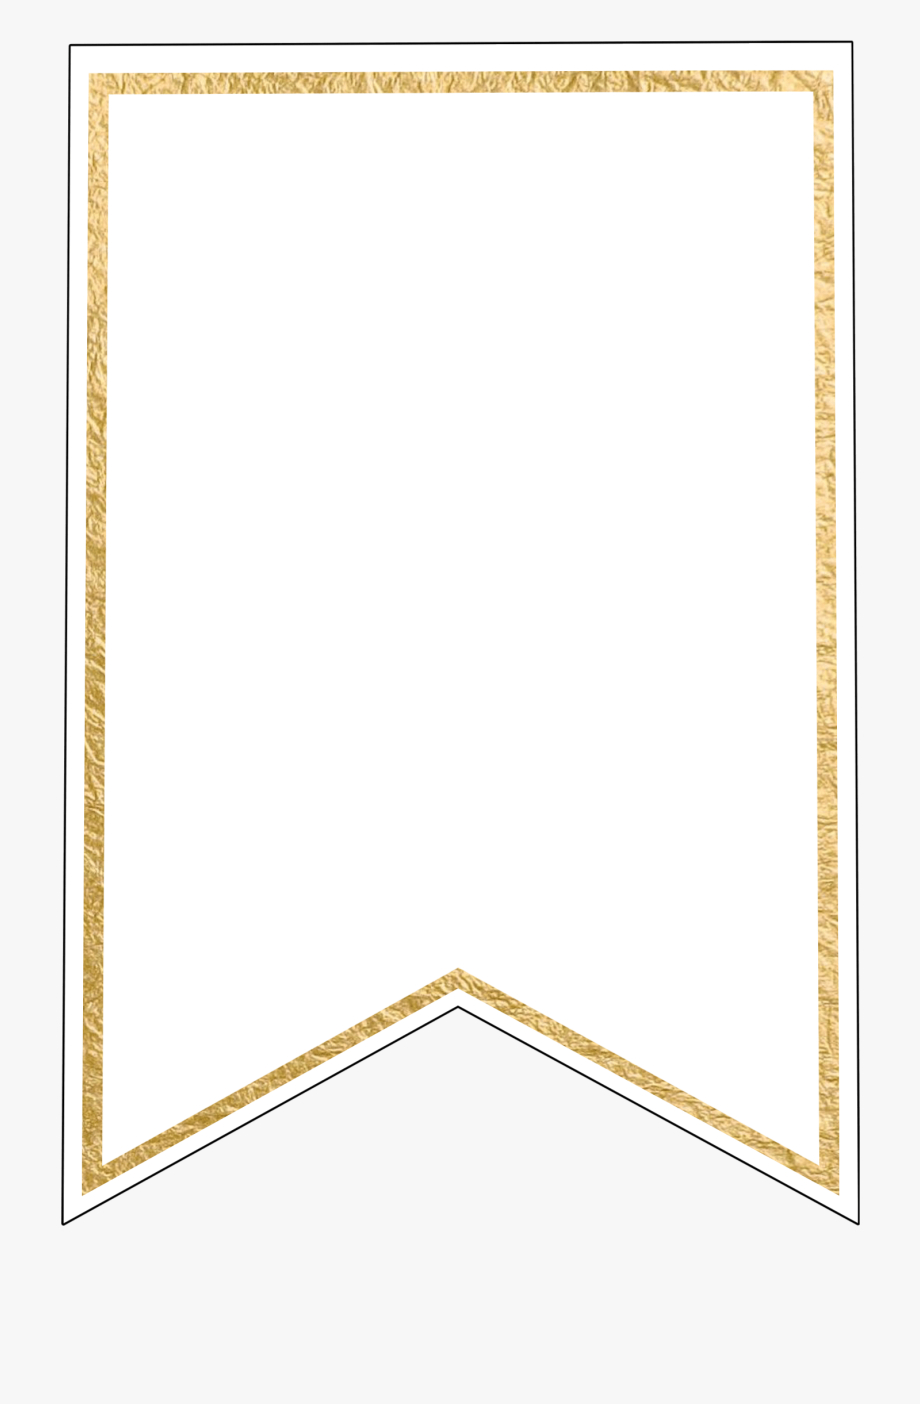 Free Pennant Banner Template, Download Free Clip Art, – Gold Within Triangle Banner Template Free